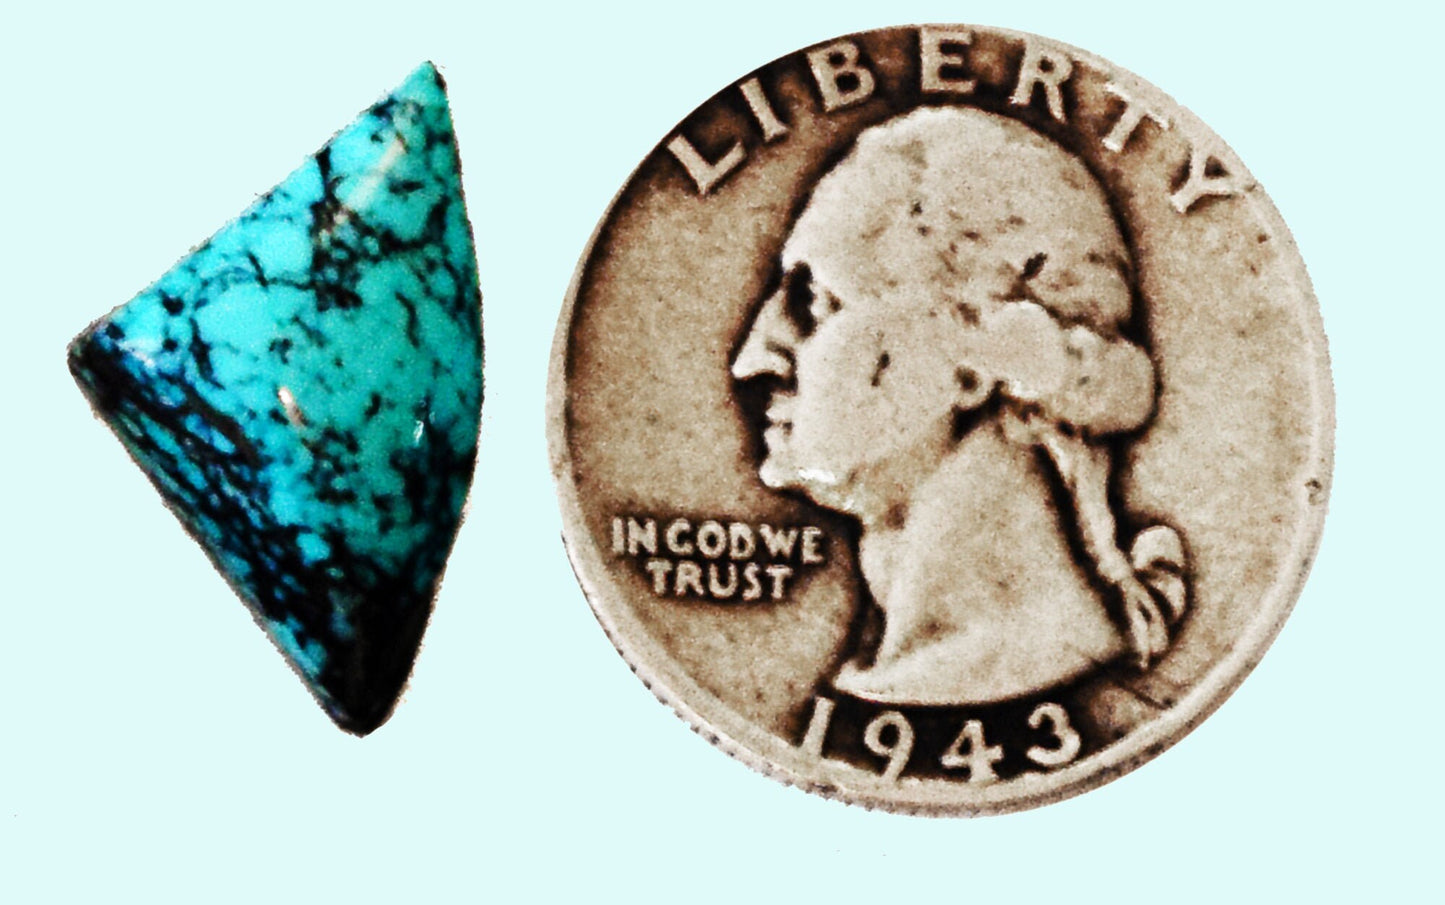 7 carats of beauty! 100% natural, untreated and unbacked, spiderweb Turquoise